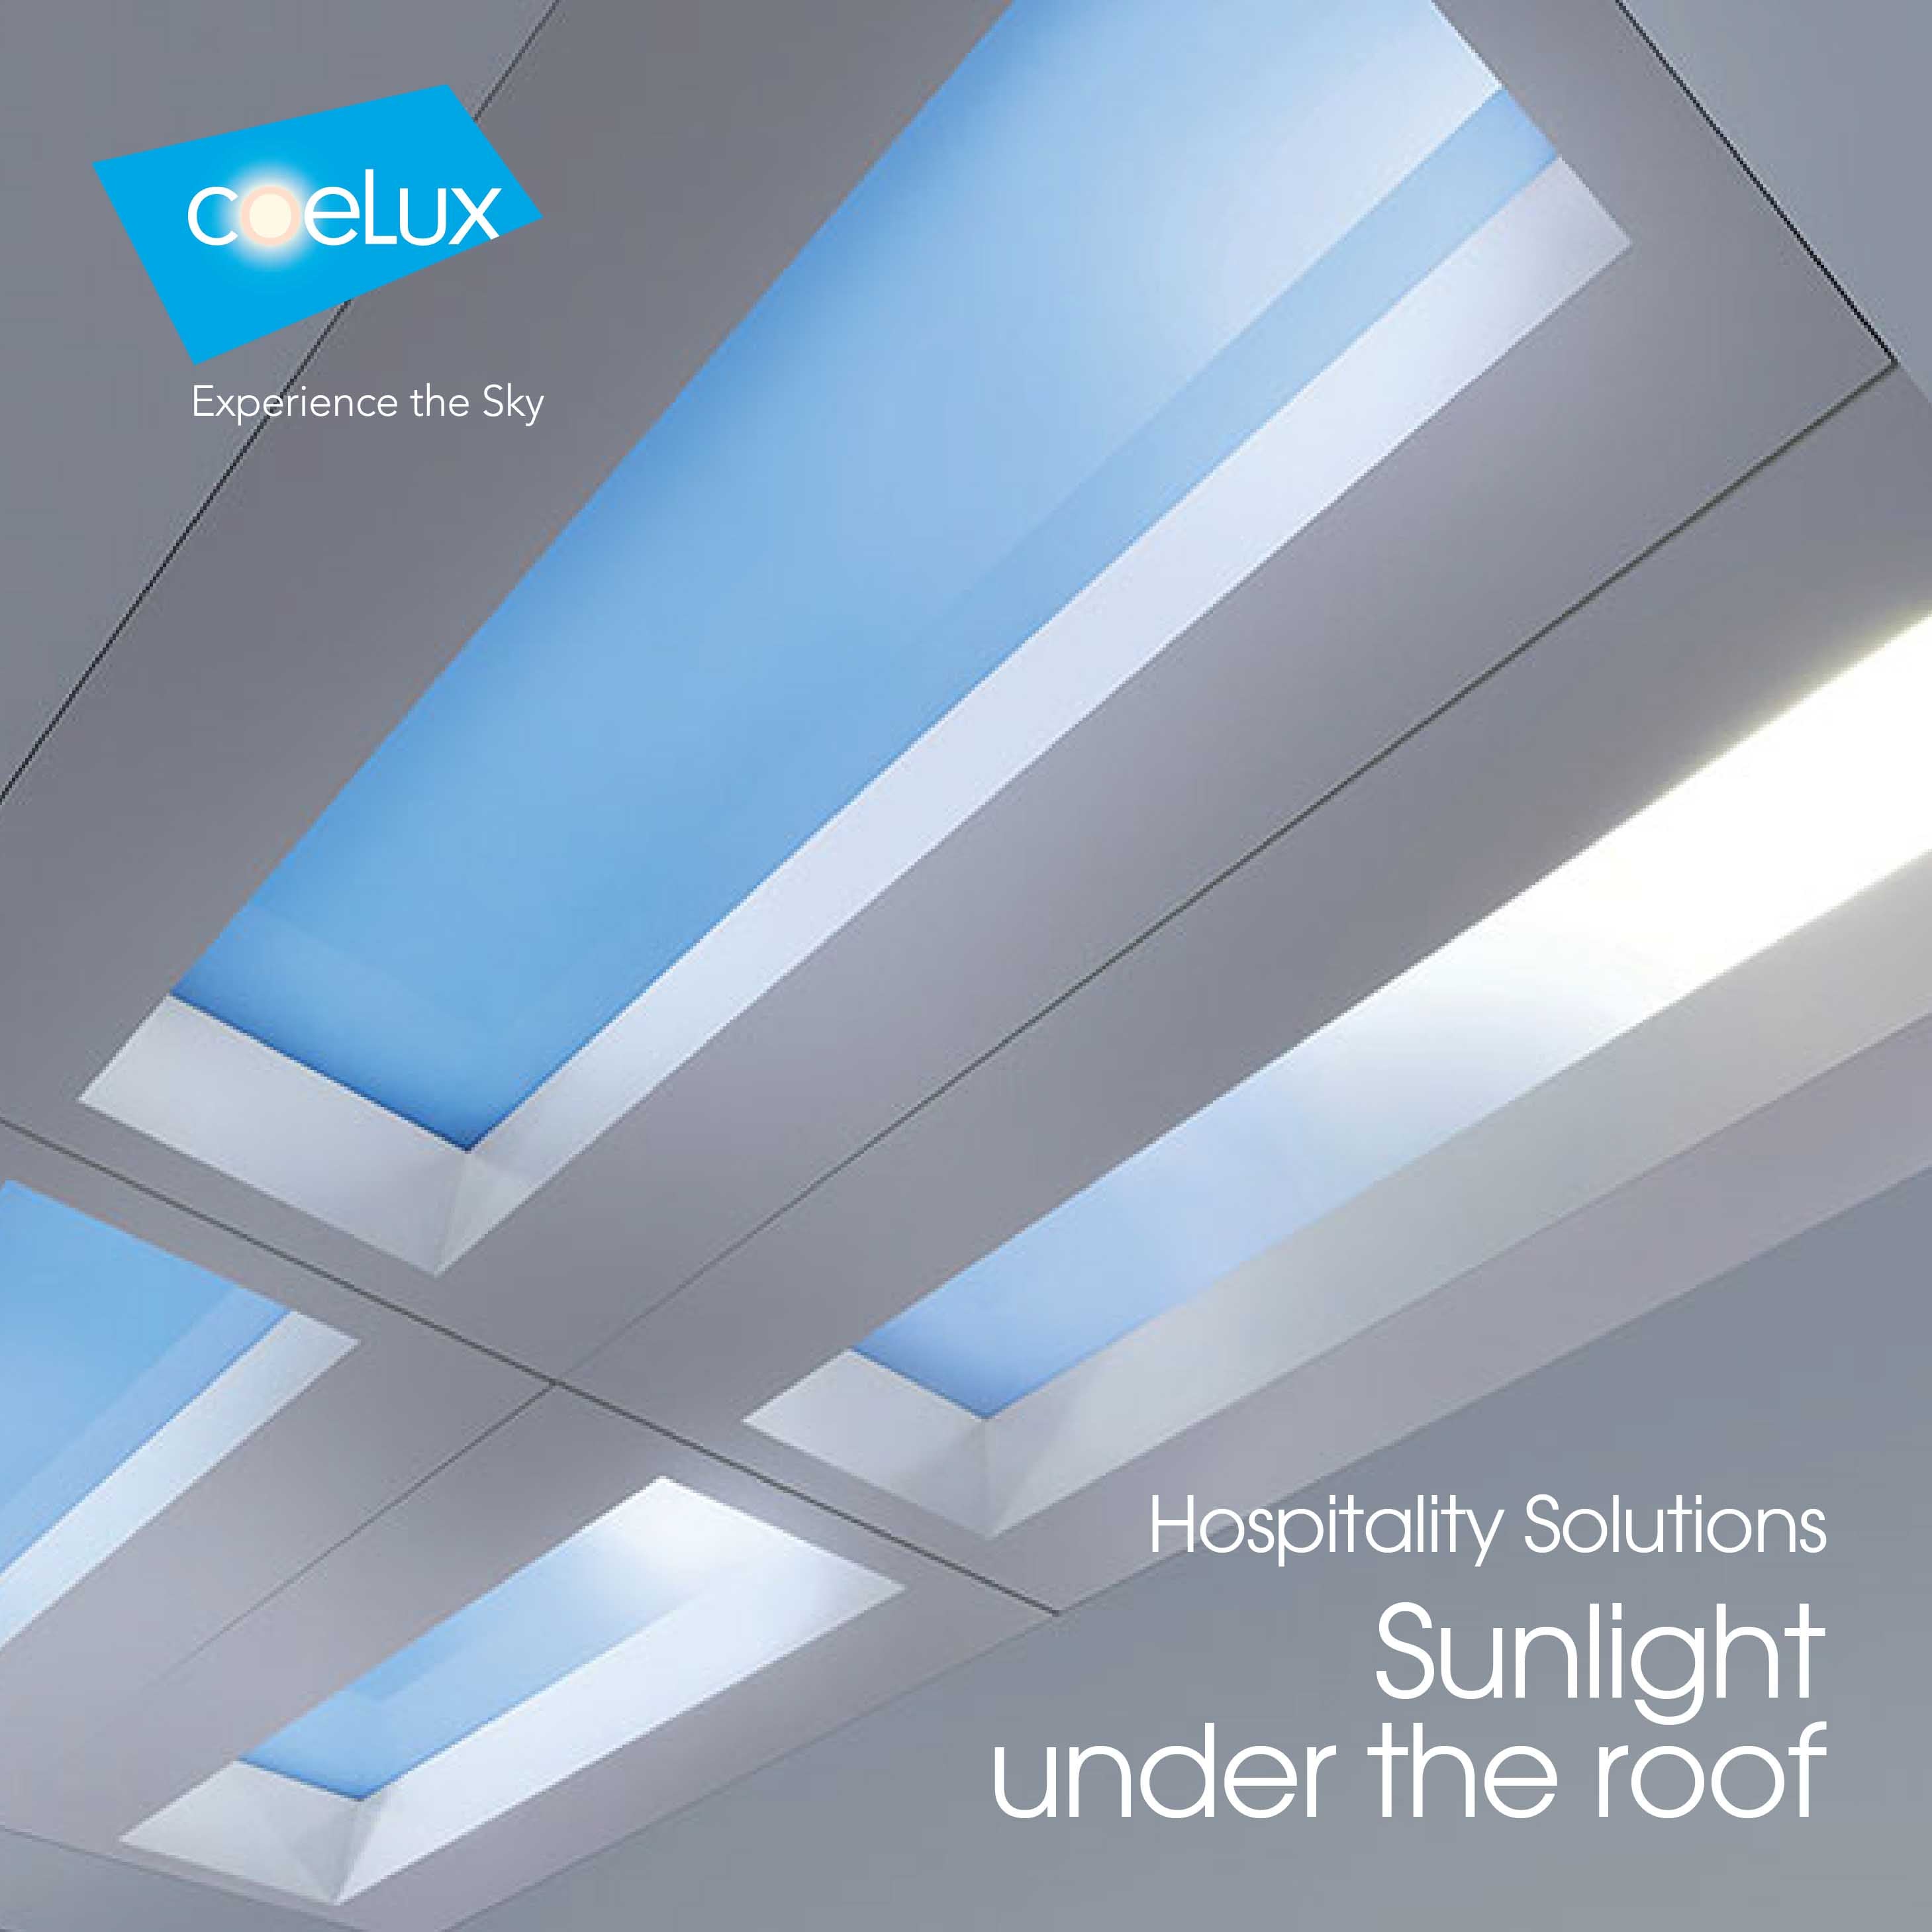 HOSPITALITY SOLUTIONS | COELUX - SUNLIGHT UNDER THE ROOF